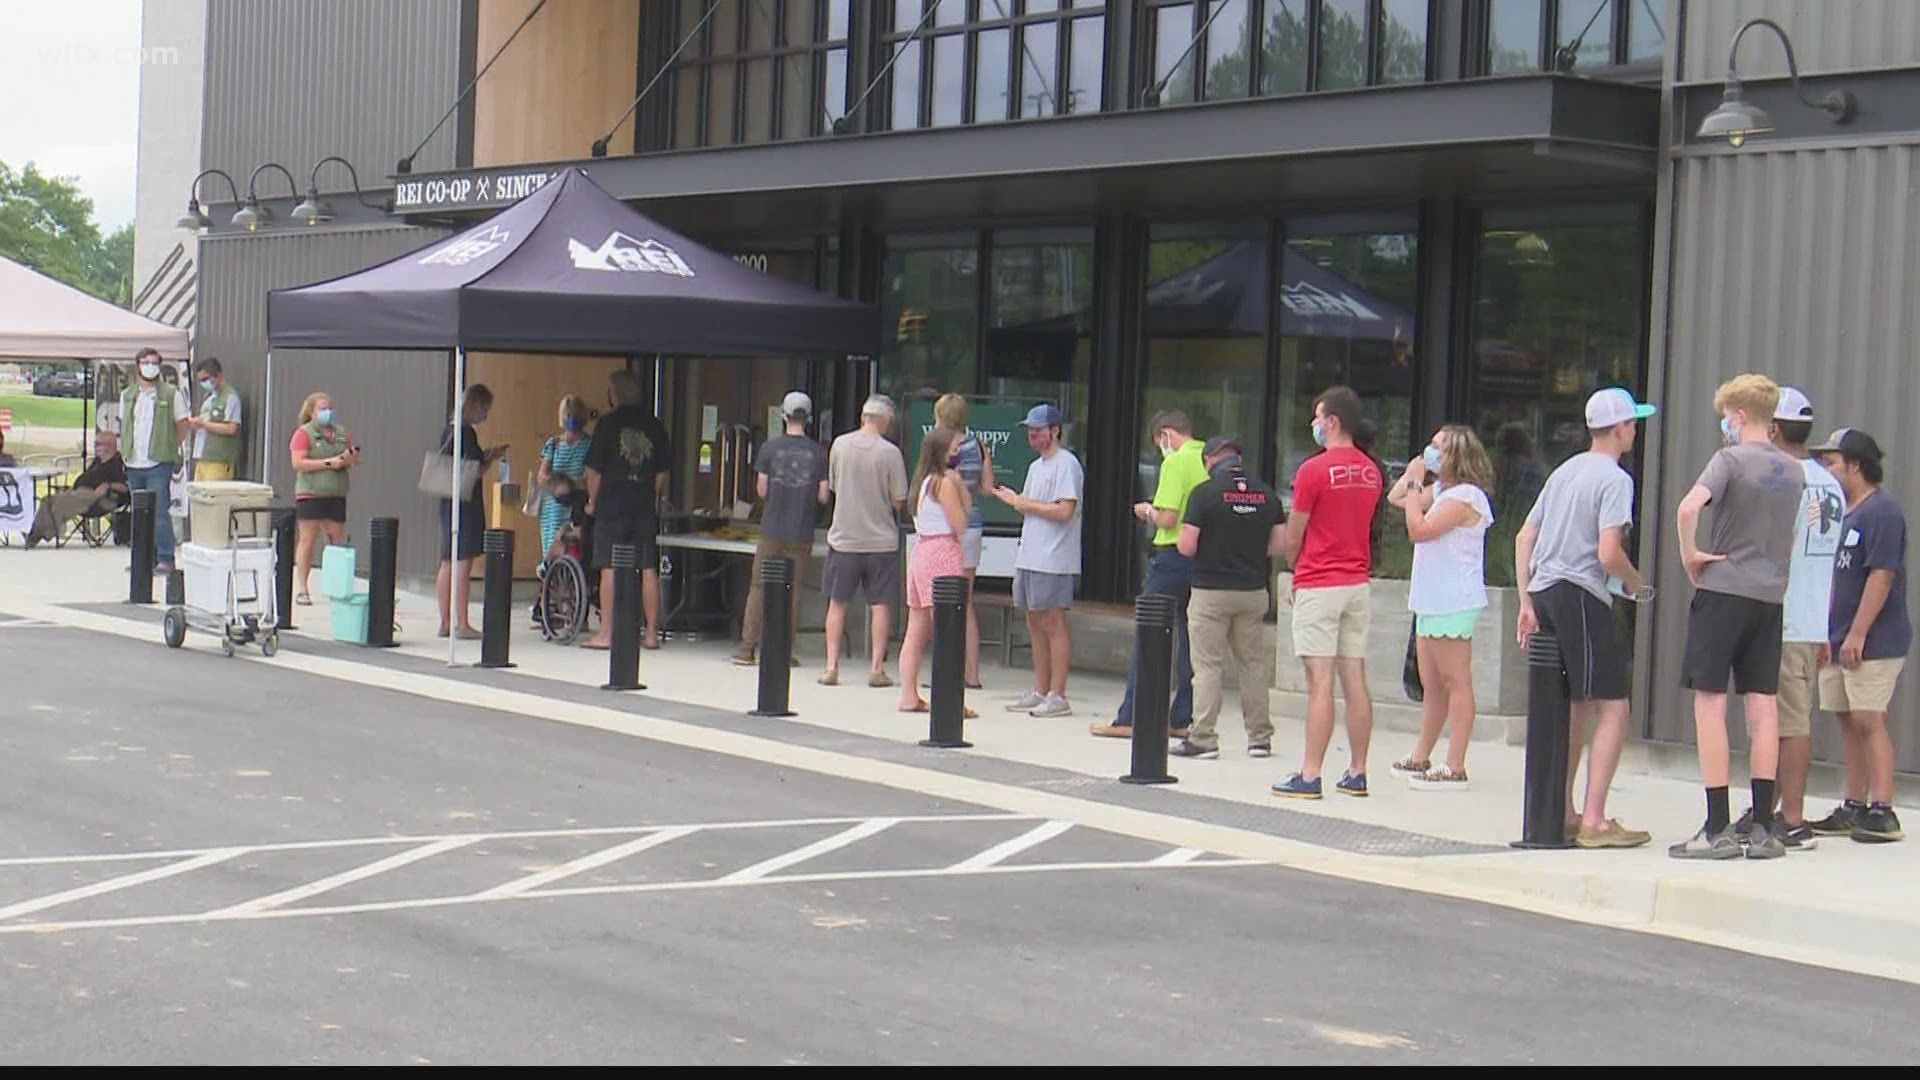 REI an outdoor store has opened and a Starbucks is expected to open at the first of the year.